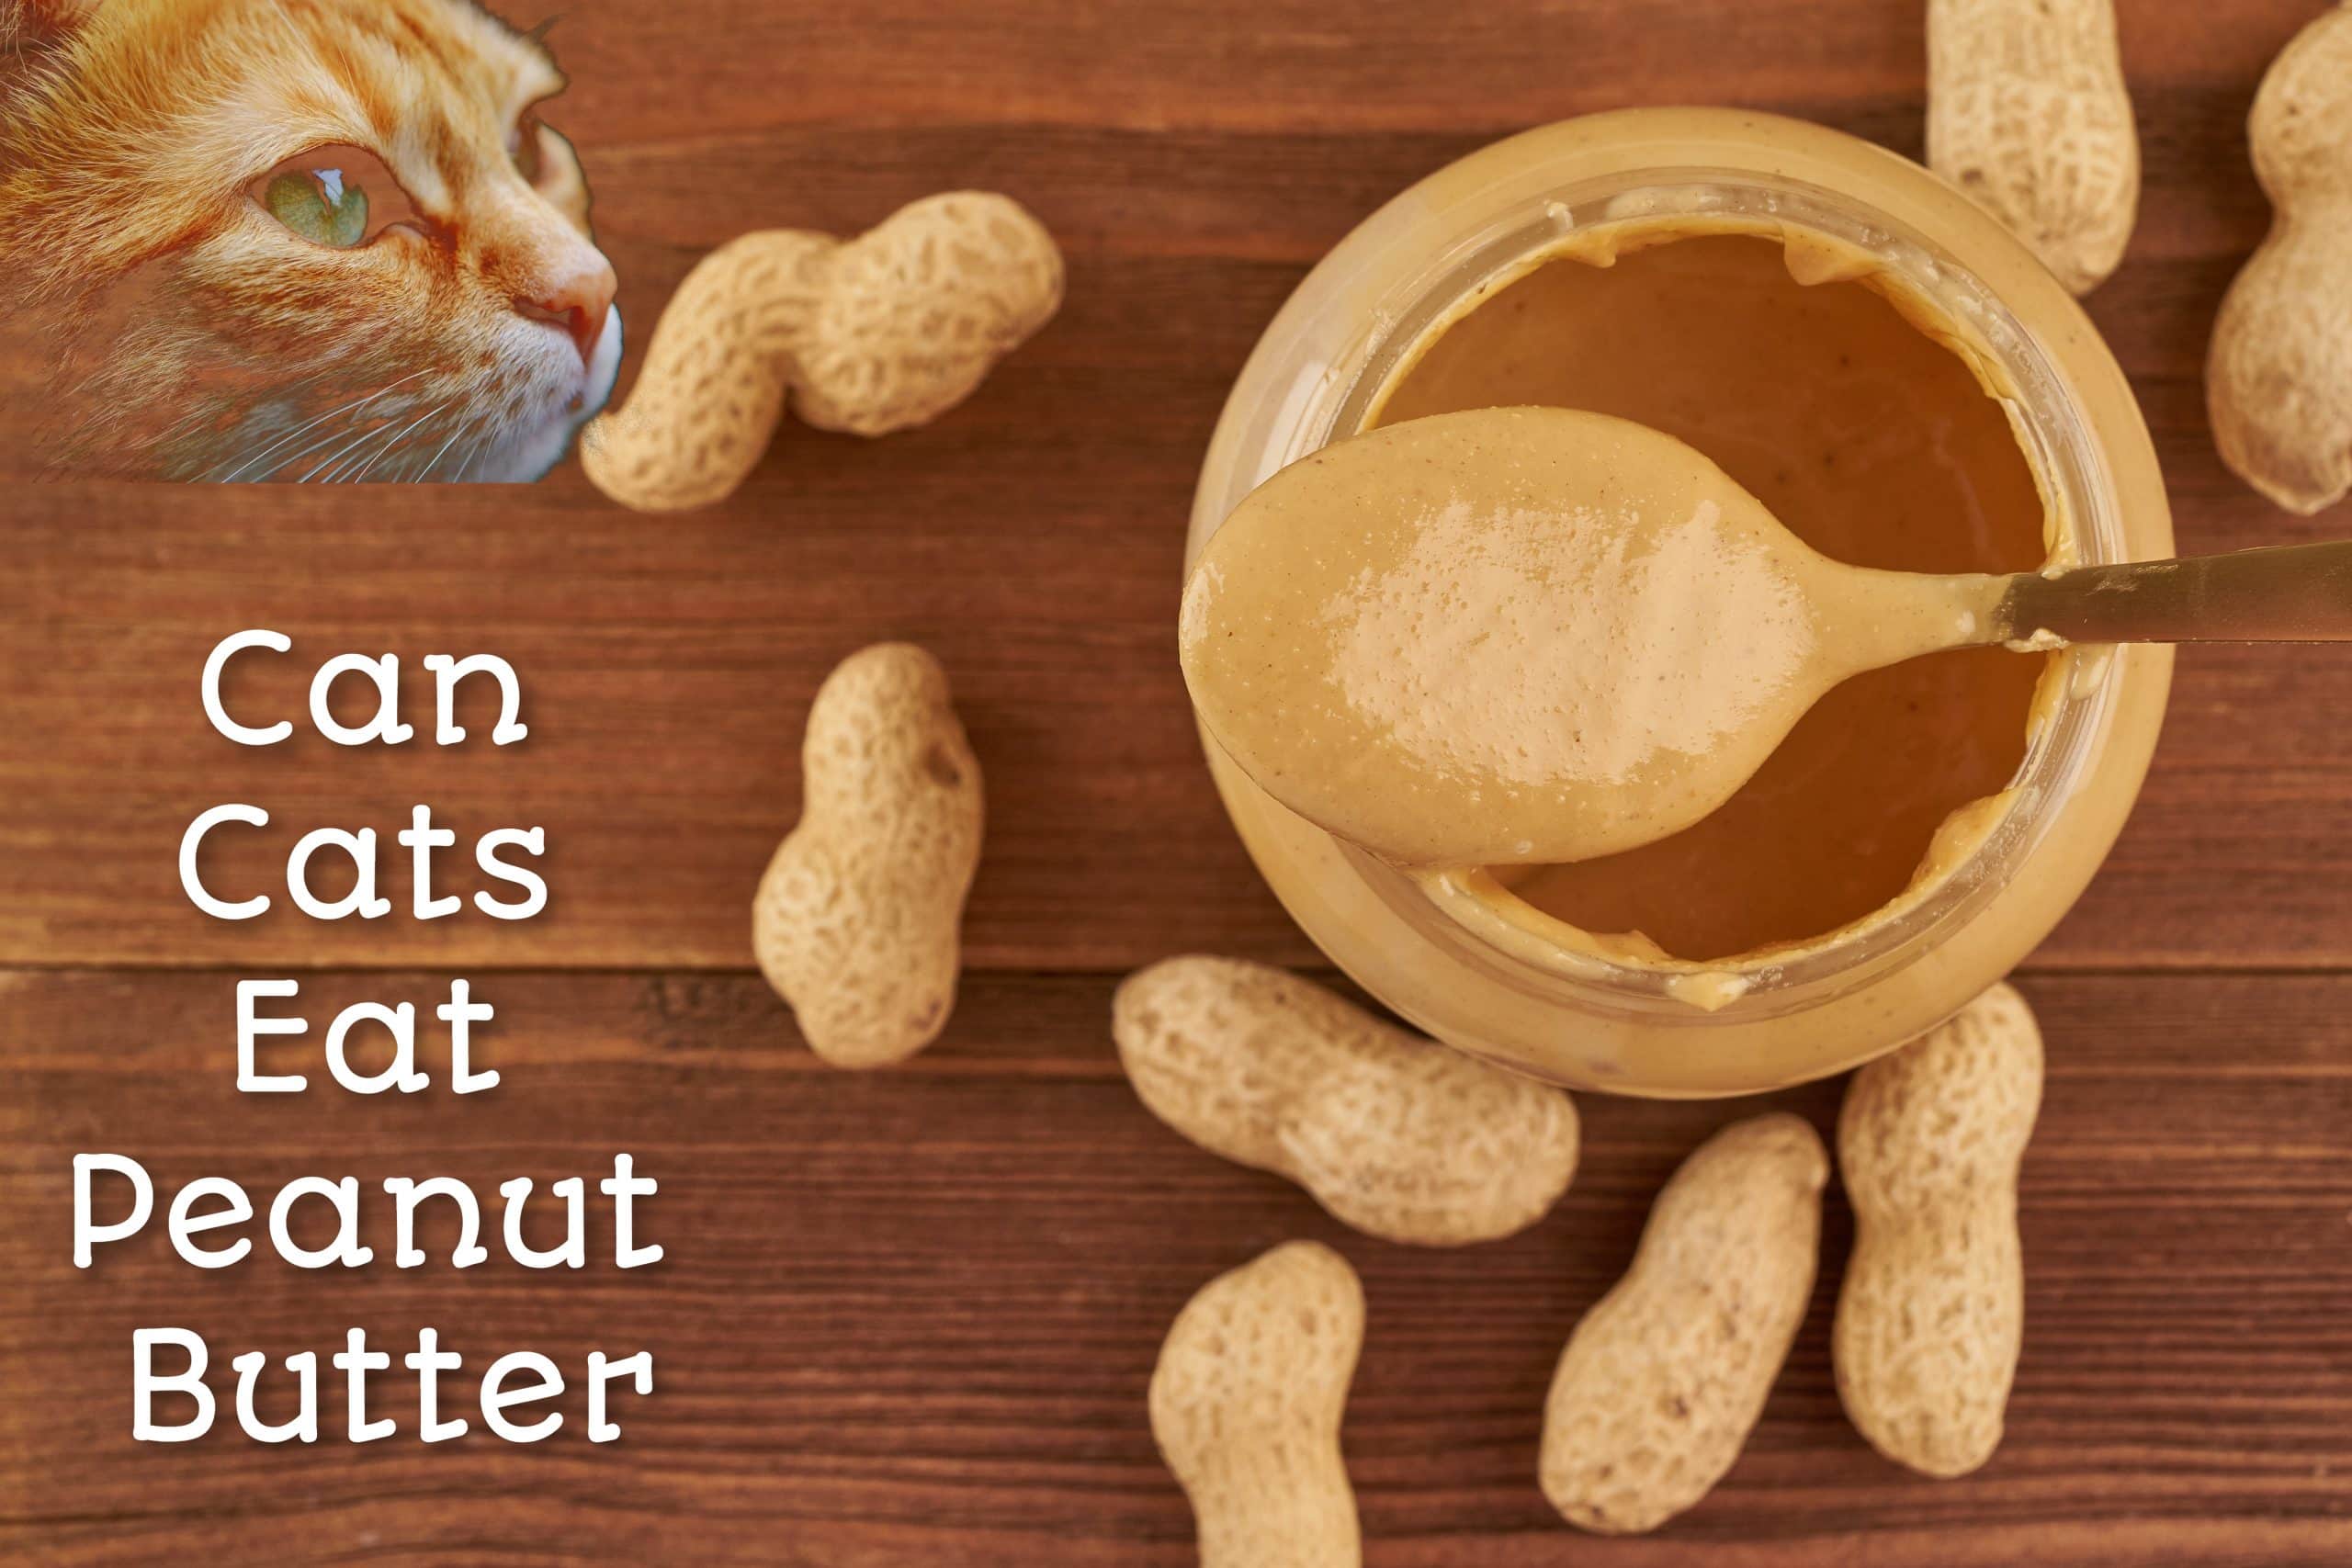 Can Cats Eat Peanut Butter